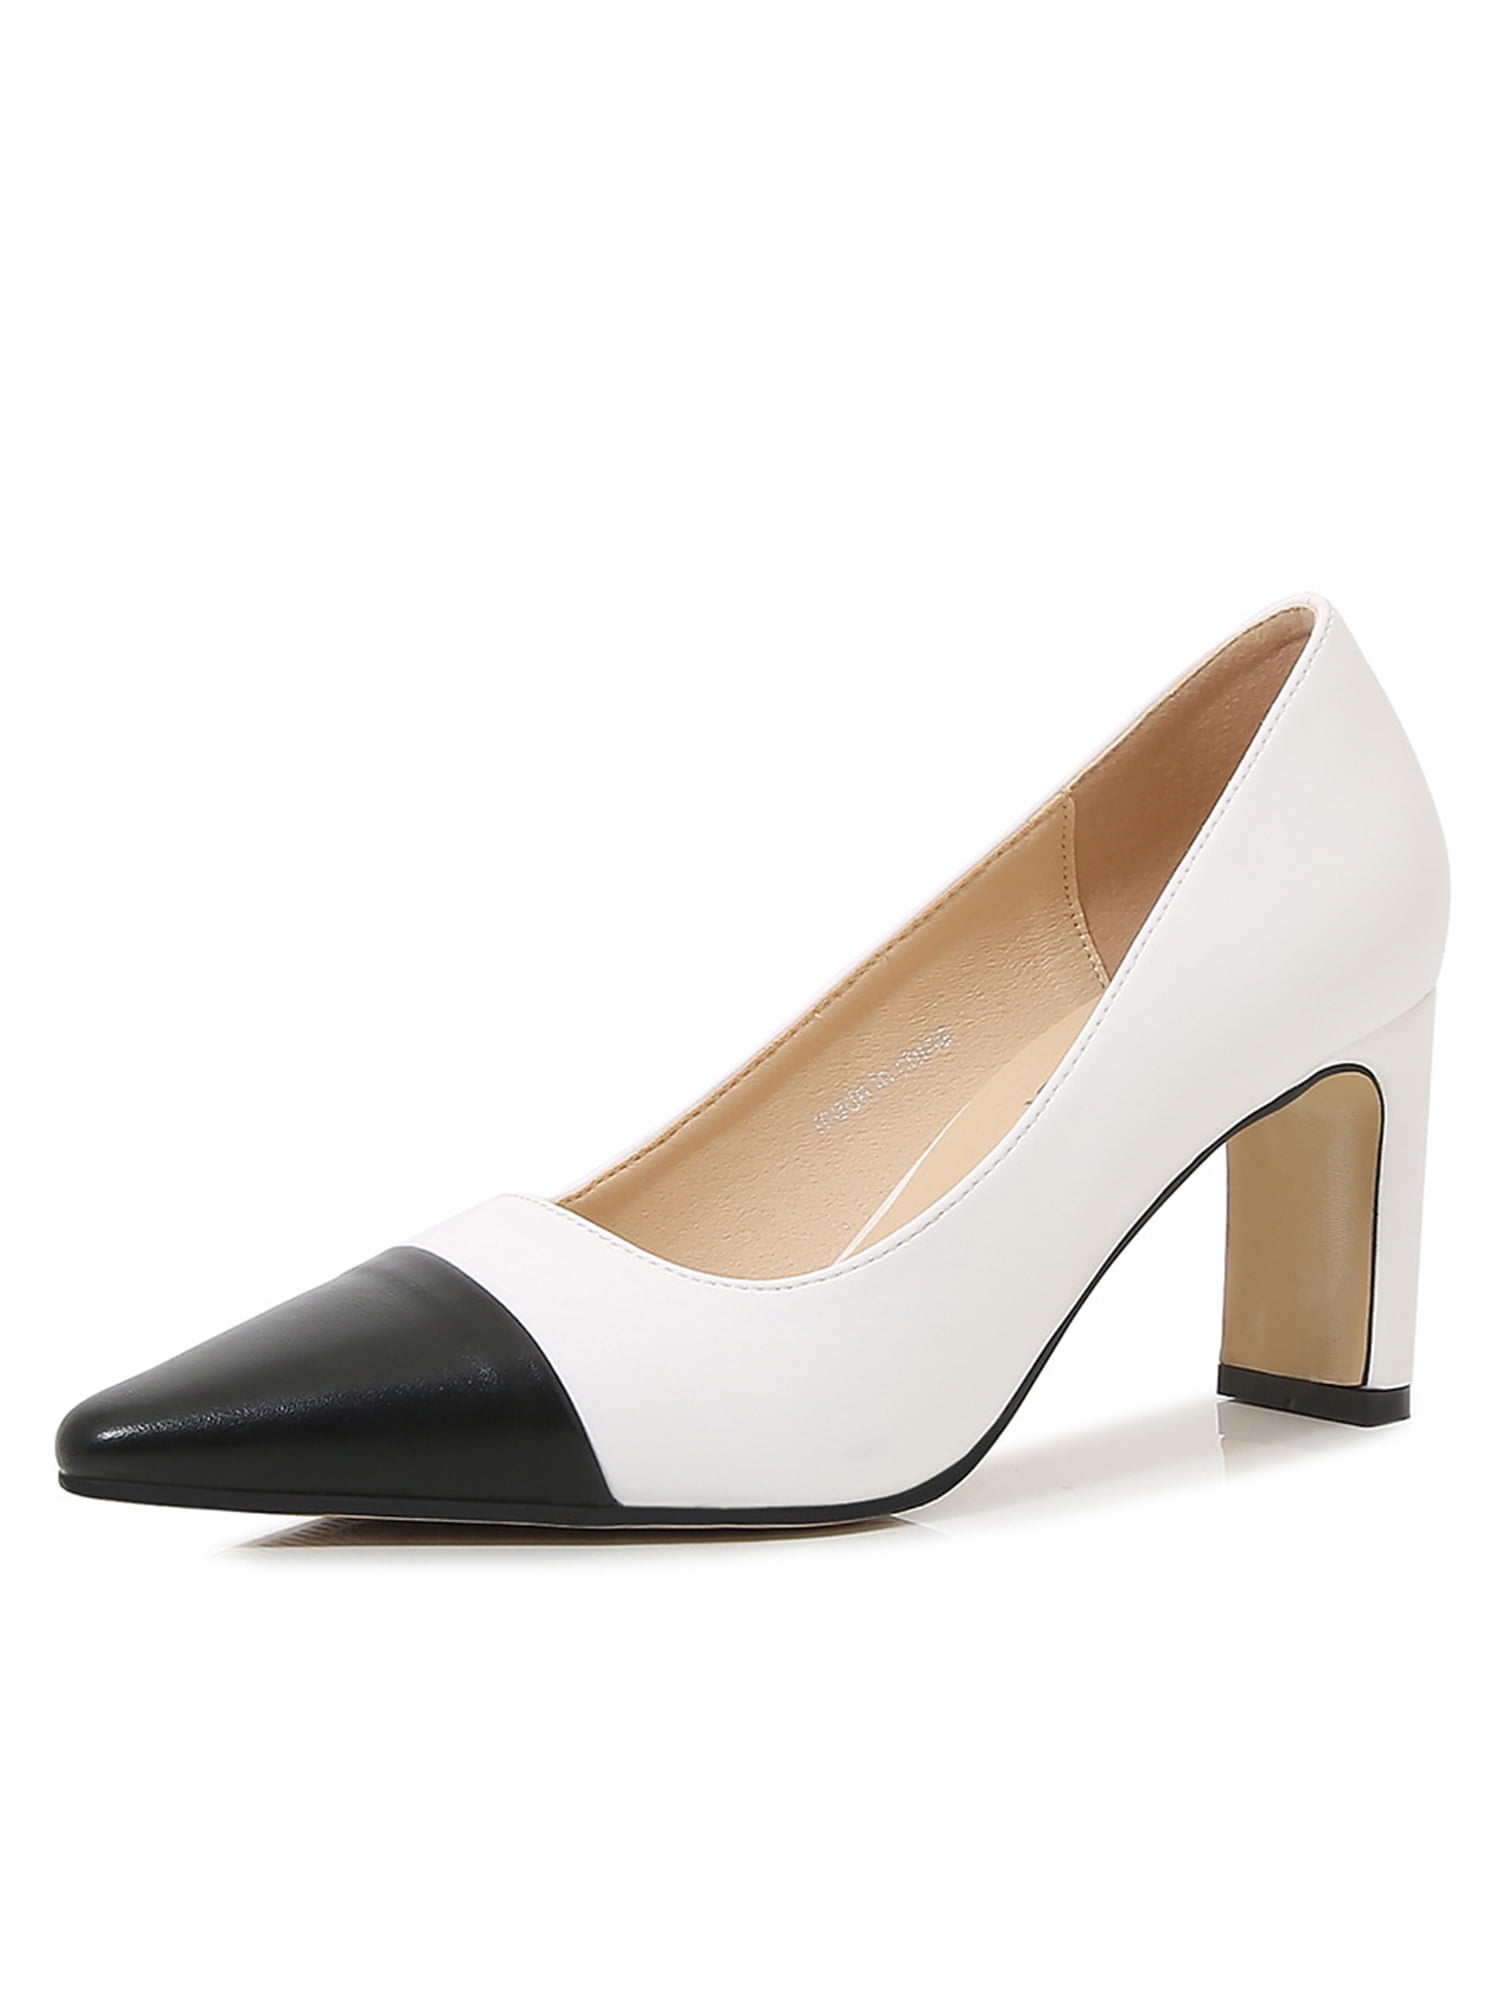 Buy Drish Classic Court Shoes with Block Heels for Women White (Size-40) at  Amazon.in